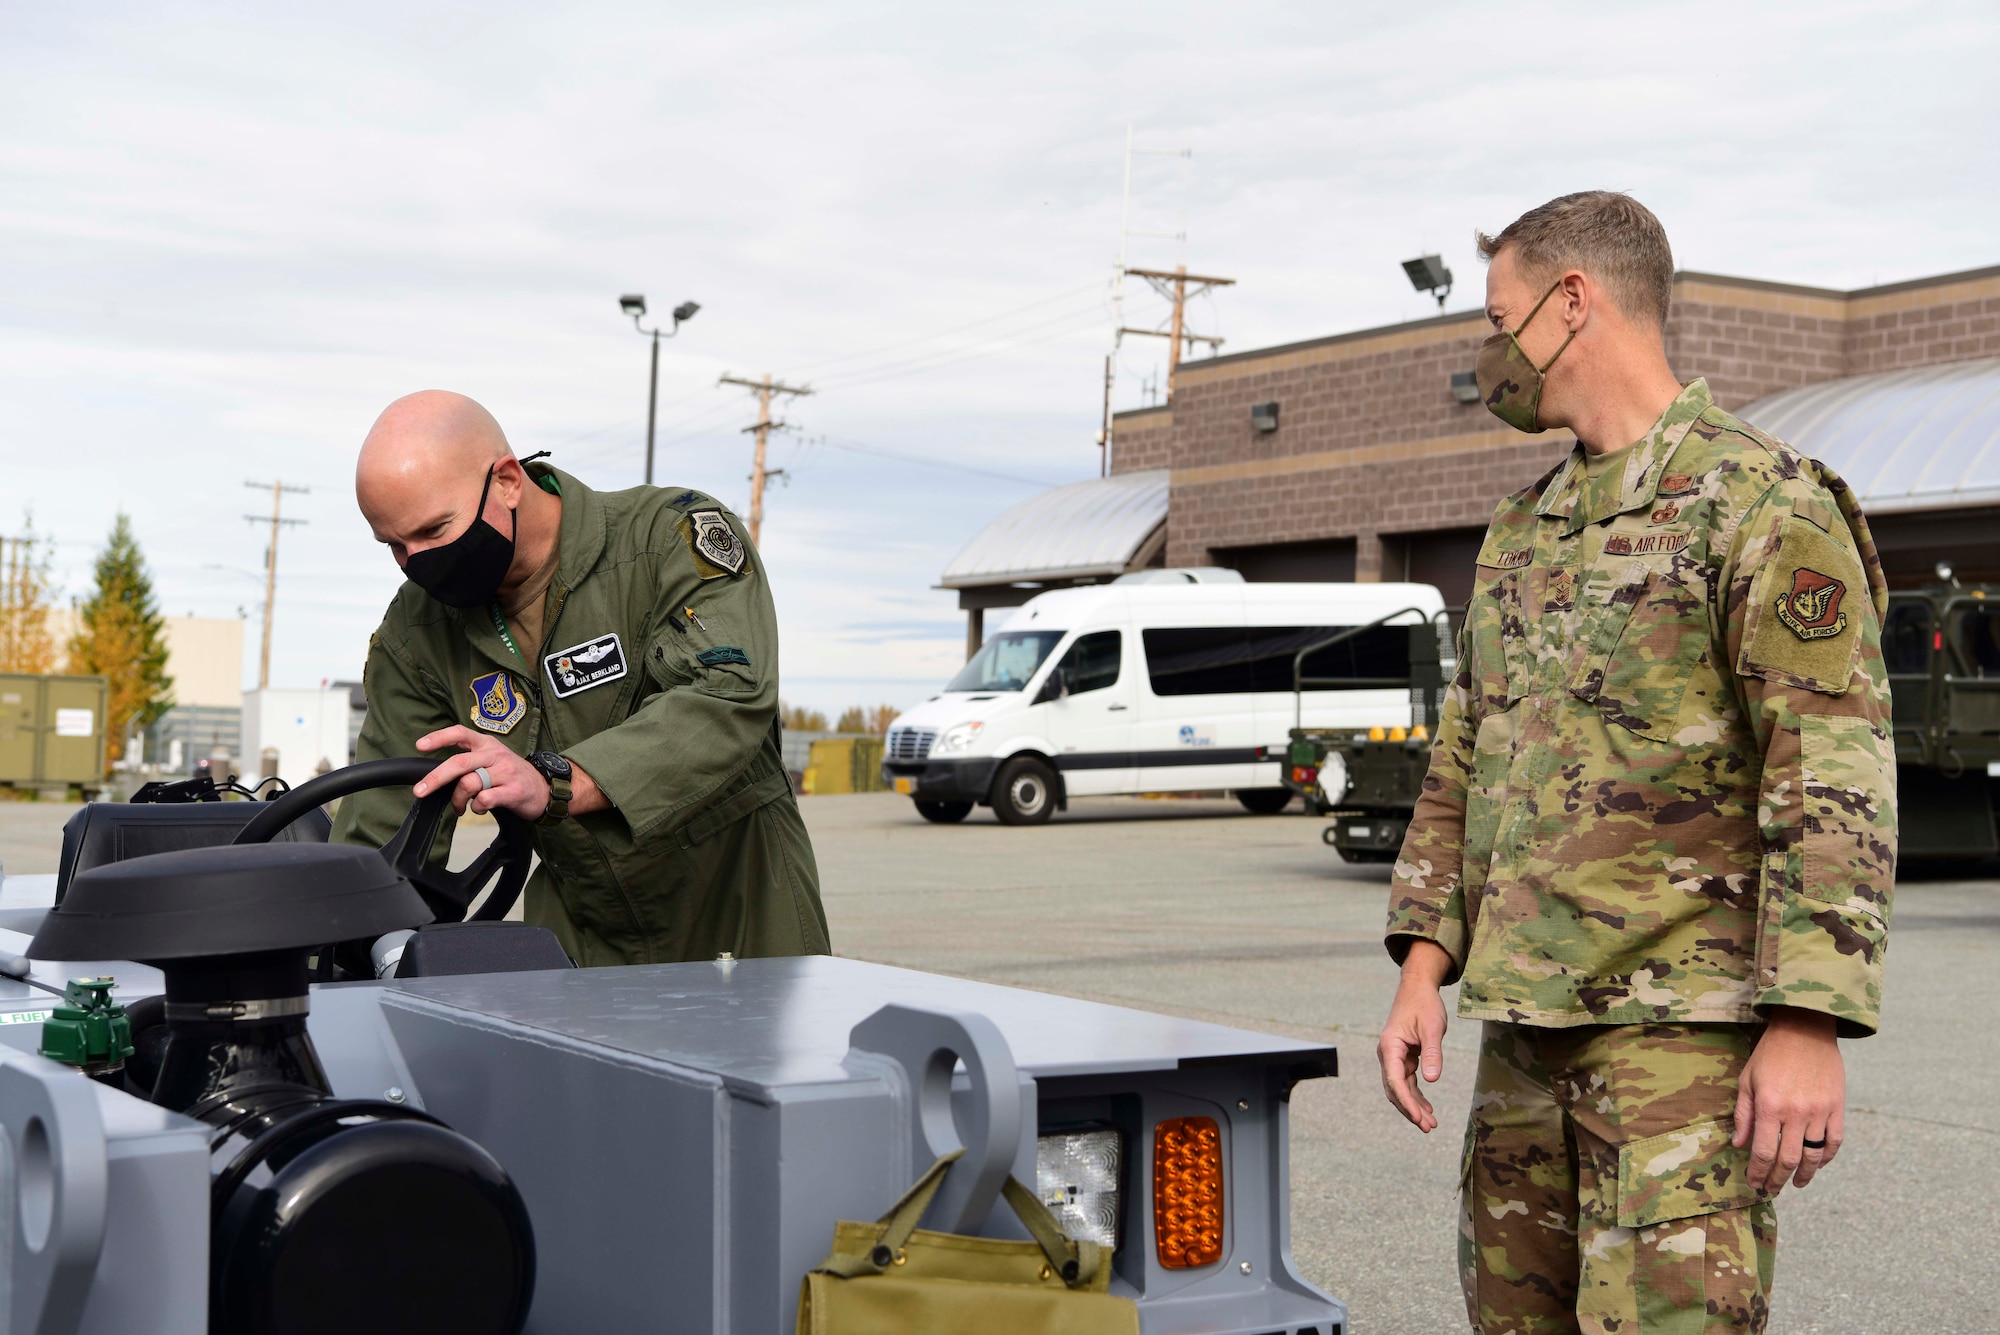 U.S. Air Force Col. David Berkland, the 354th Fighter Wing (FW) commander, and Chief Master Sgt. John Lokken, the 354th FW command chief, examine a vehicle at Eielson Air Force Base, Alaska, Sept. 15, 2020.